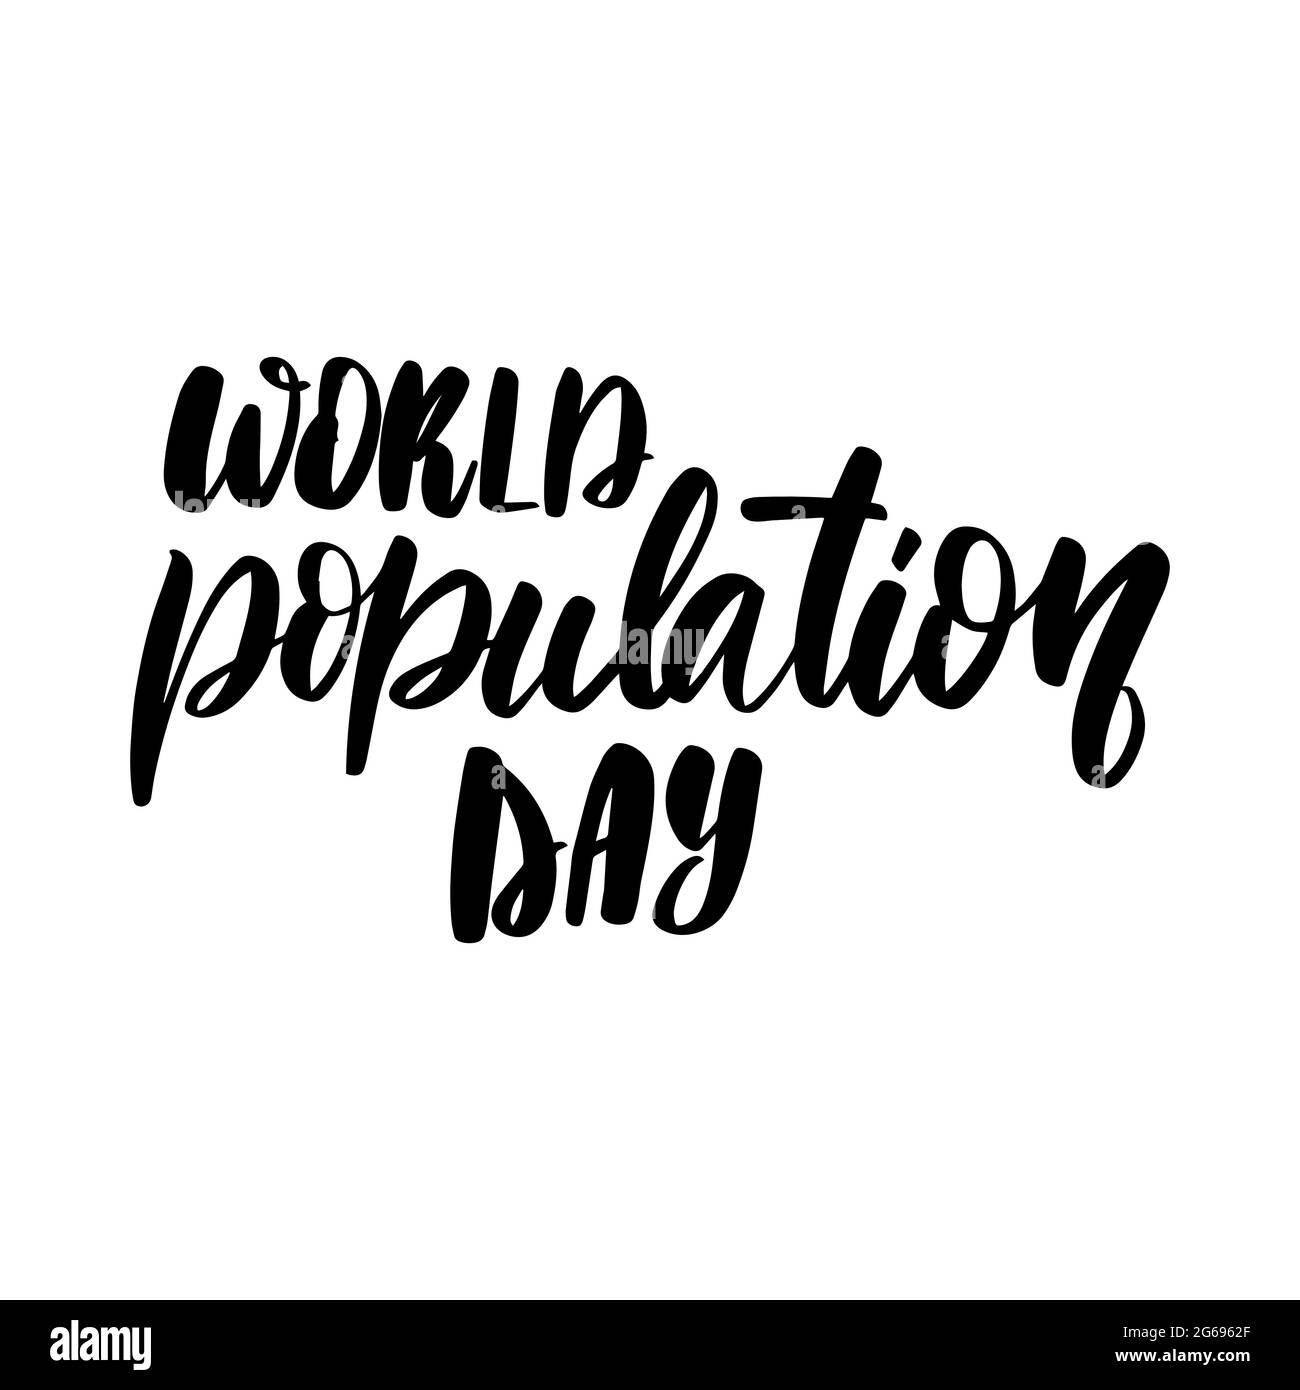 World population day vector poster. July 11th population Stock Vector